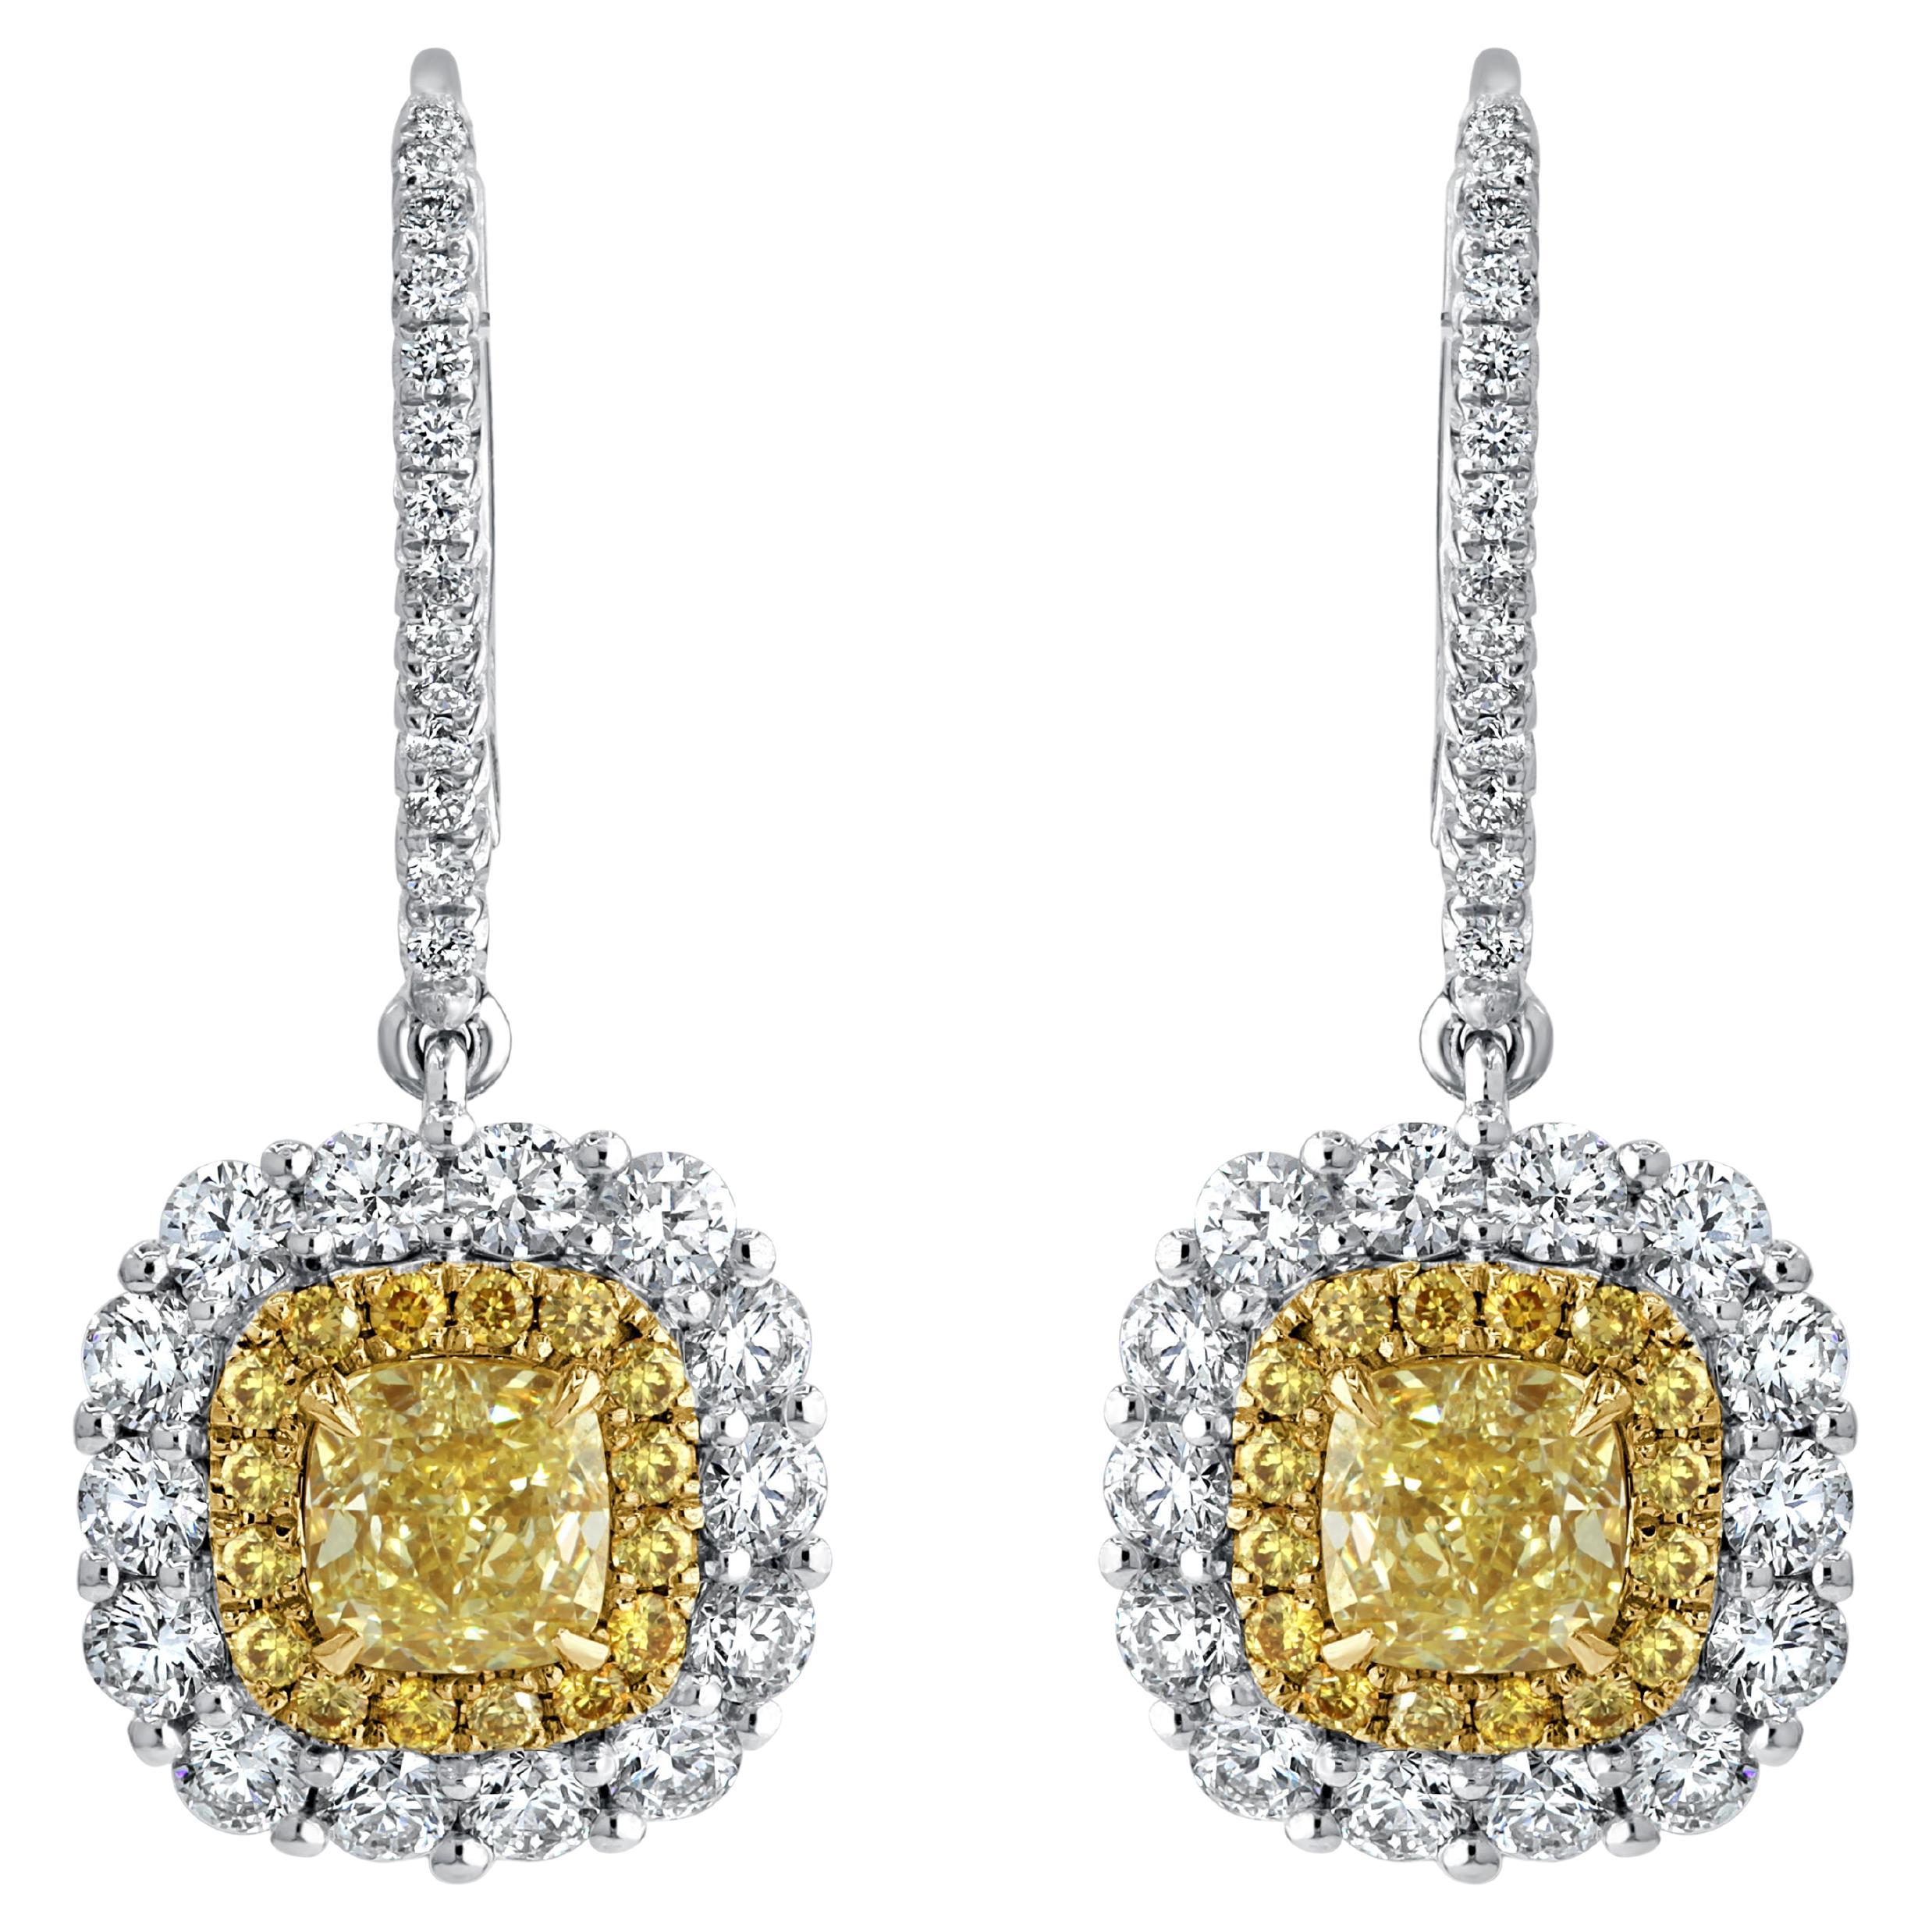 2.95 Carat T.W. Yellow/White Diamond Earrings, with 1.4ct GIA centers ref1163 For Sale